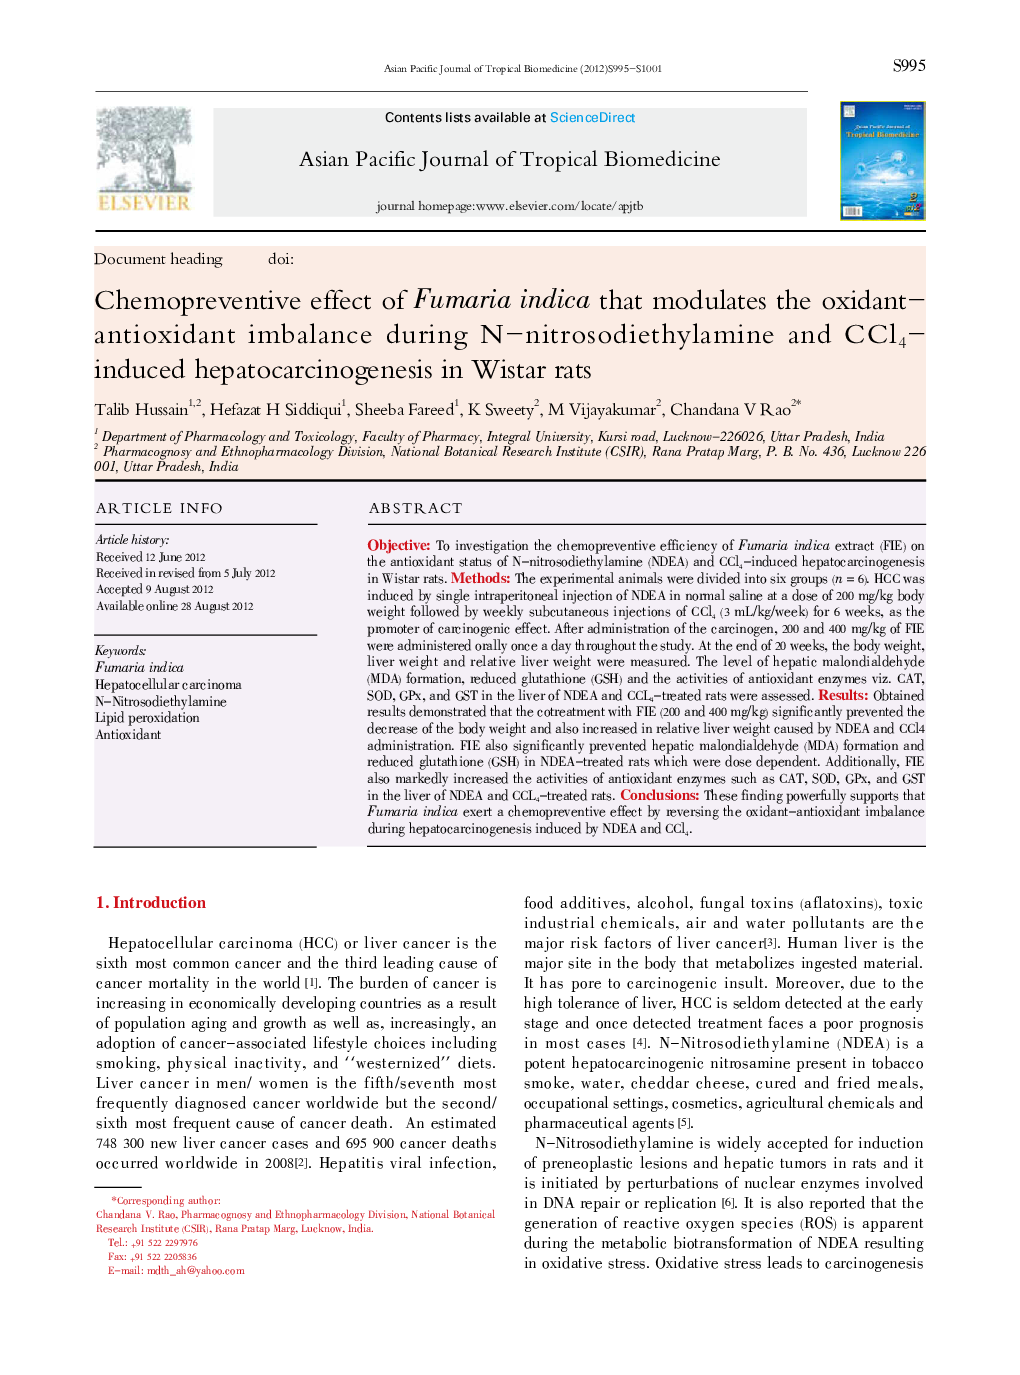 Chemopreventive effect of Fumaria indica that modulates the oxidant-antioxidant imbalance during N-nitrosodiethylamine and CC14-induced hepatocarcinogenesis in Wistar rats